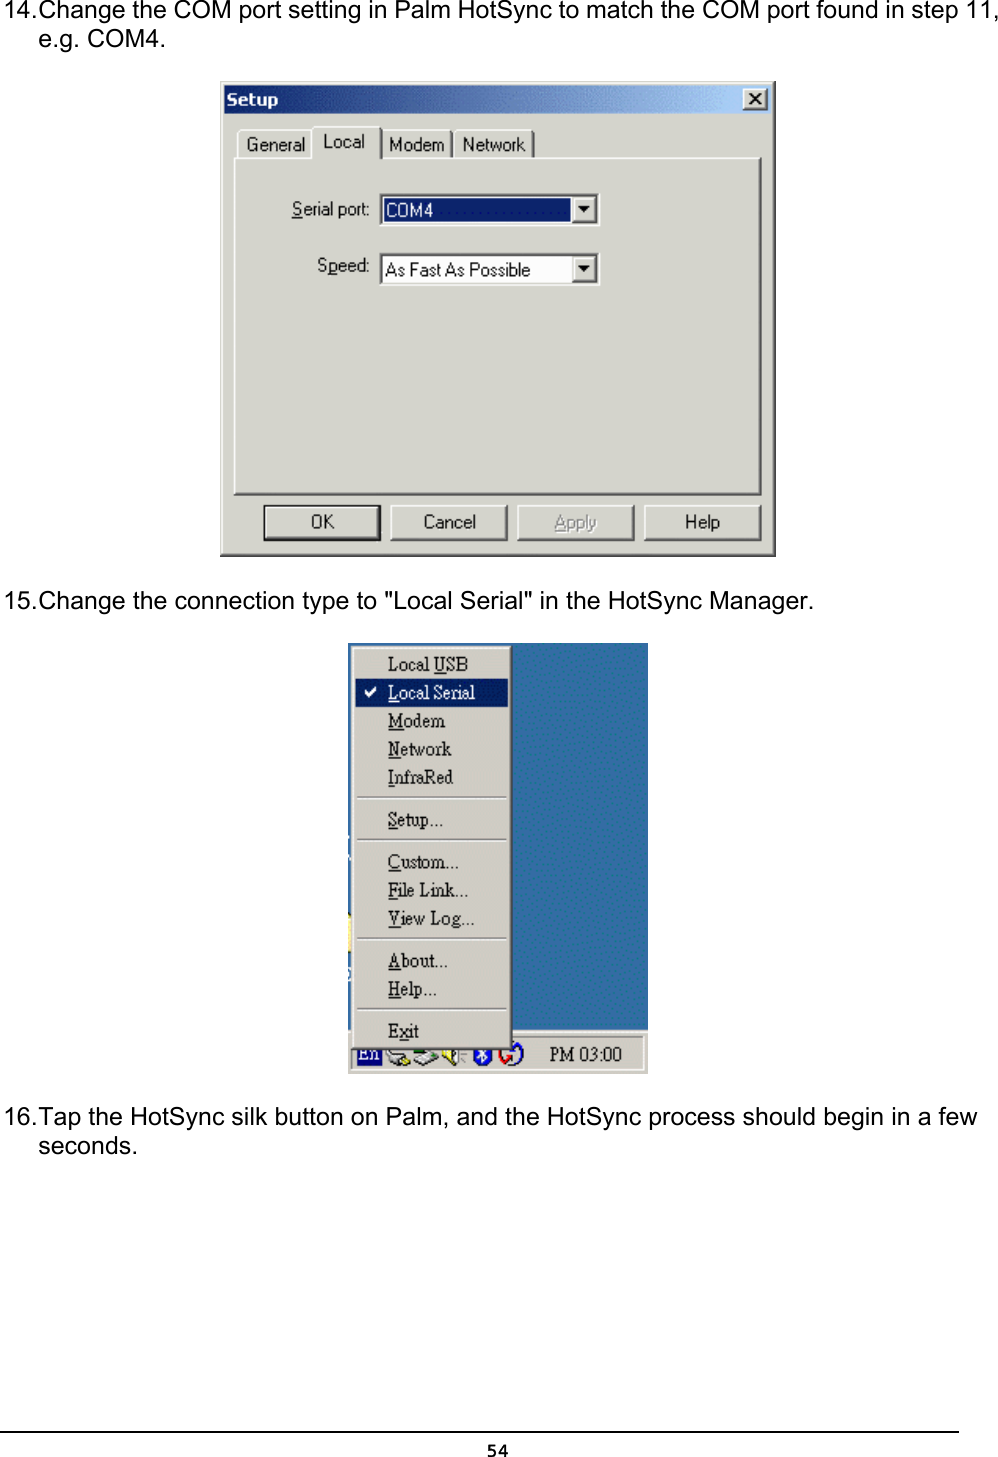   5414. Change the COM port setting in Palm HotSync to match the COM port found in step 11, e.g. COM4.  15. Change the connection type to &quot;Local Serial&quot; in the HotSync Manager.  16. Tap the HotSync silk button on Palm, and the HotSync process should begin in a few seconds. 